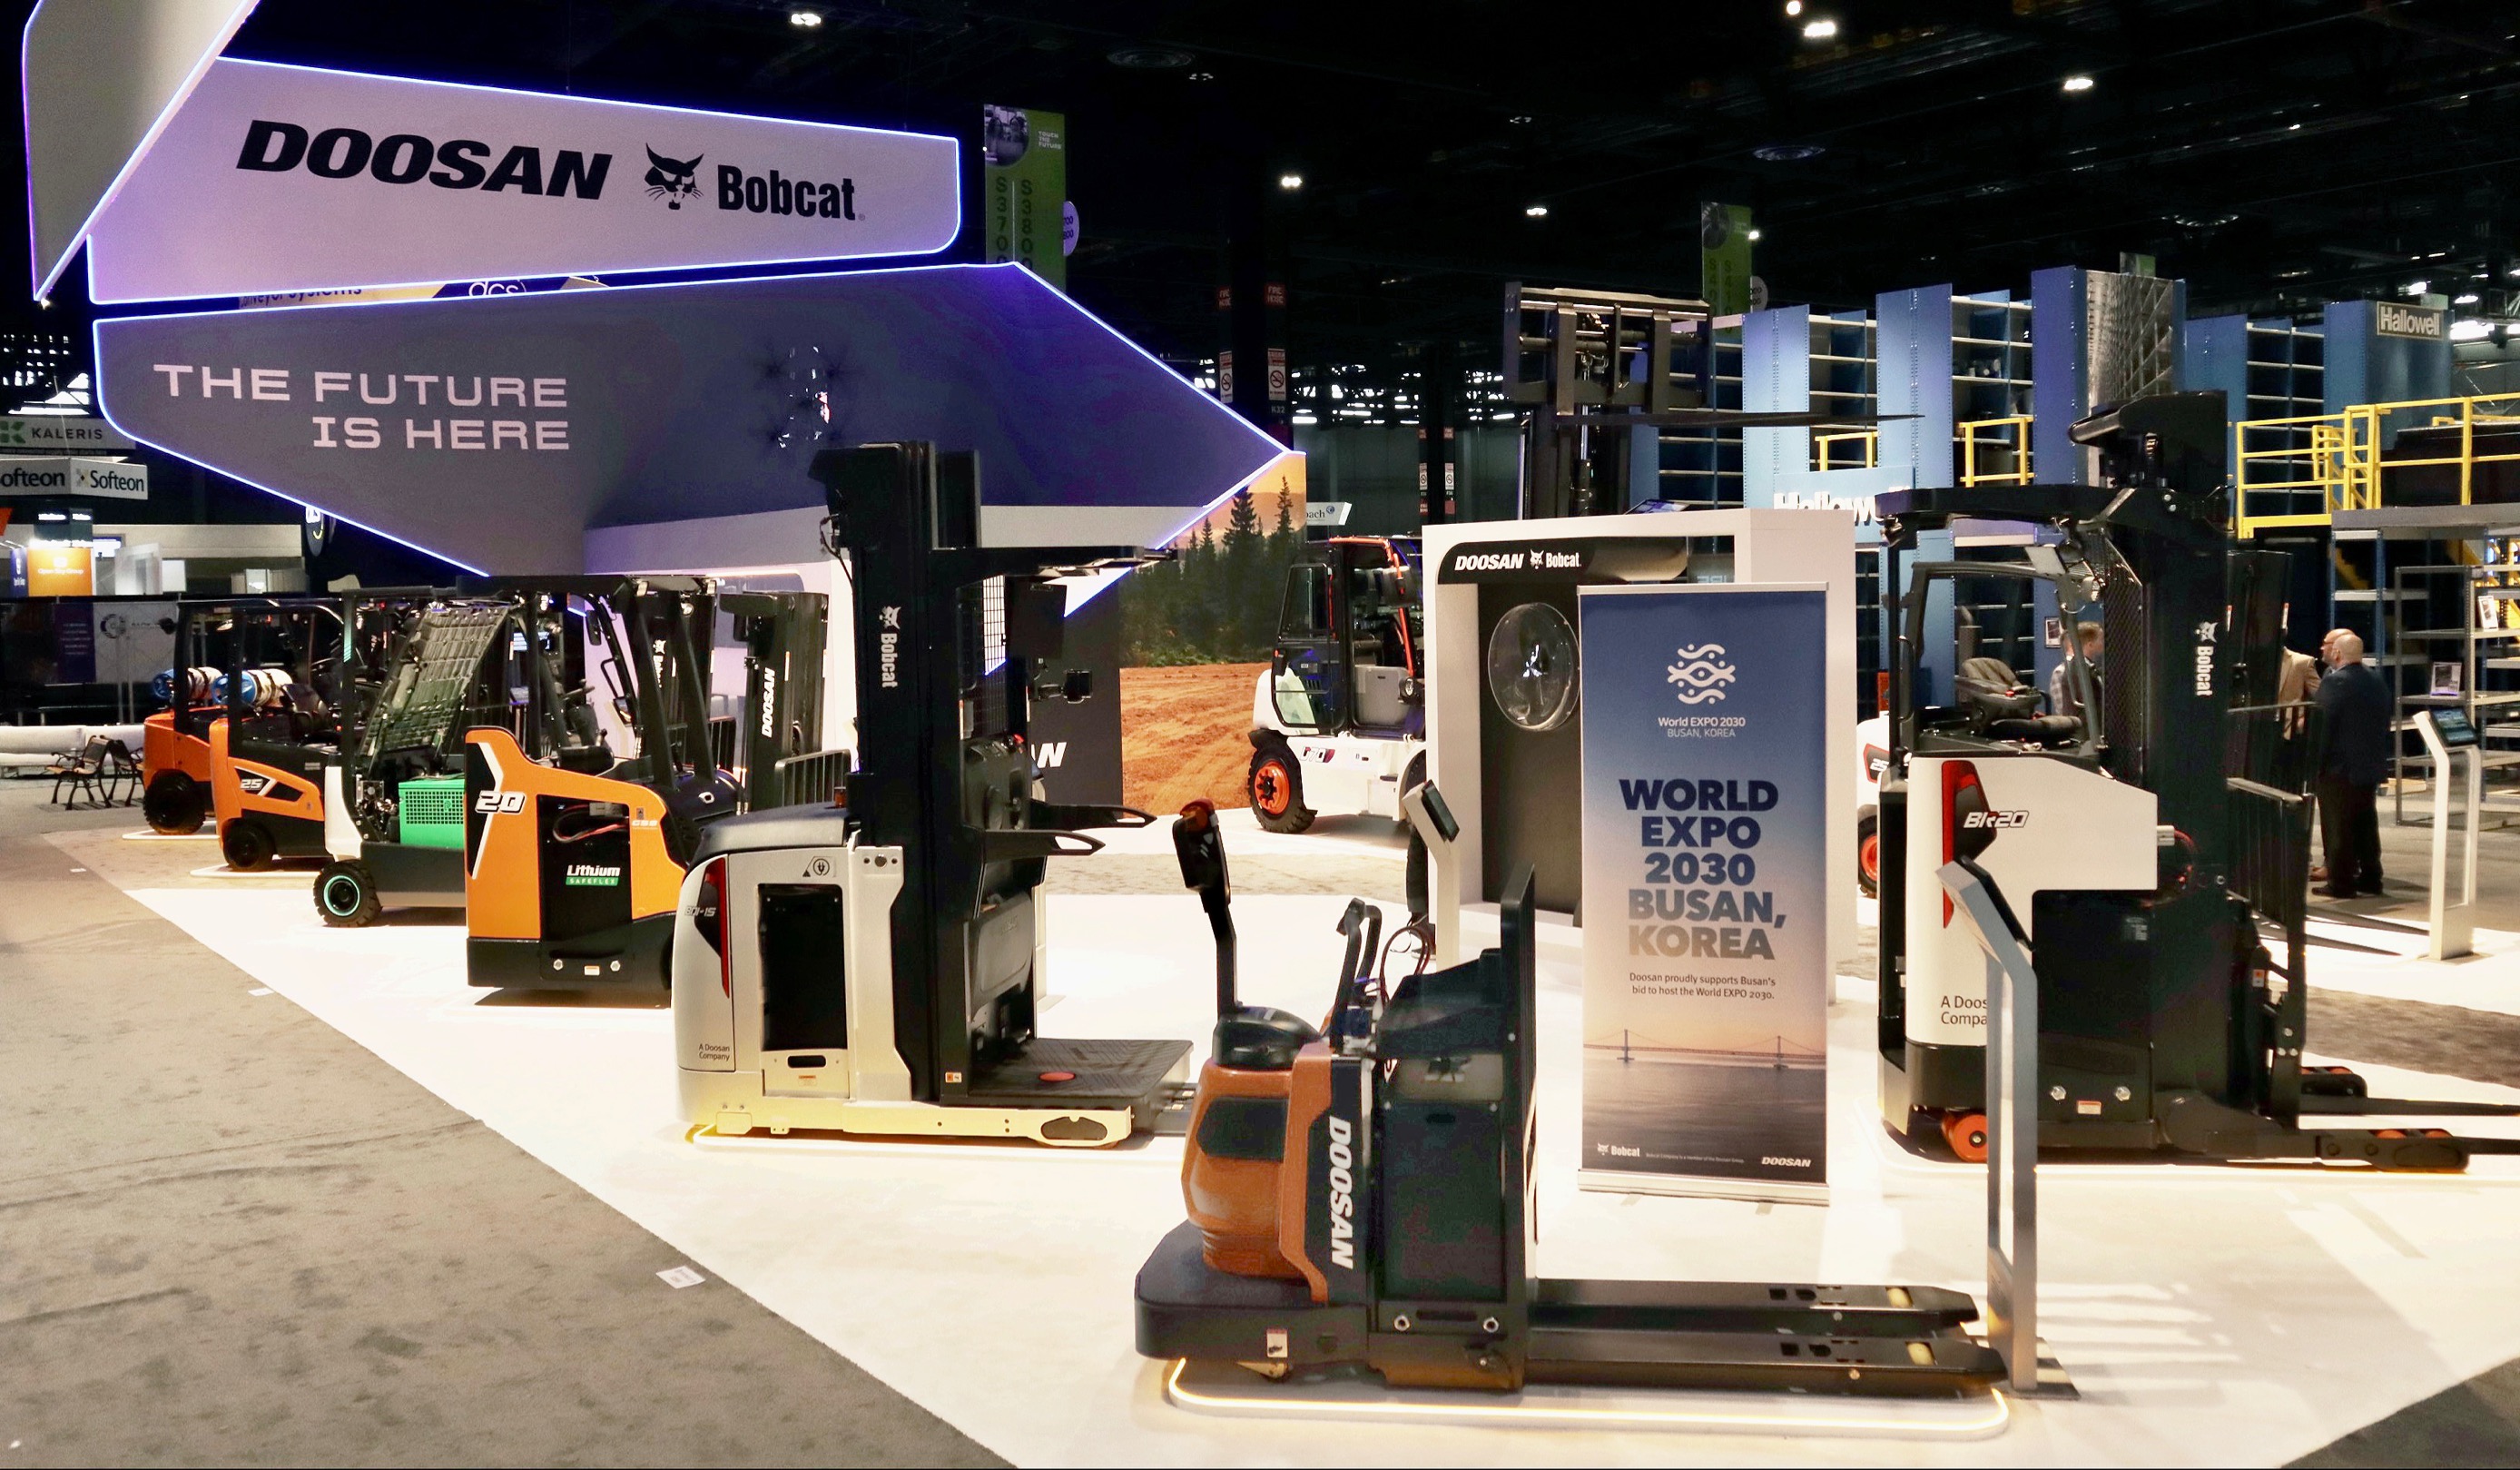 Doosan Bobcat participated in ‘Promat 2023’ and introduced Doosan Industrial Vehicle’s material handling equipment and Bobcat branded forklifts for the first time.